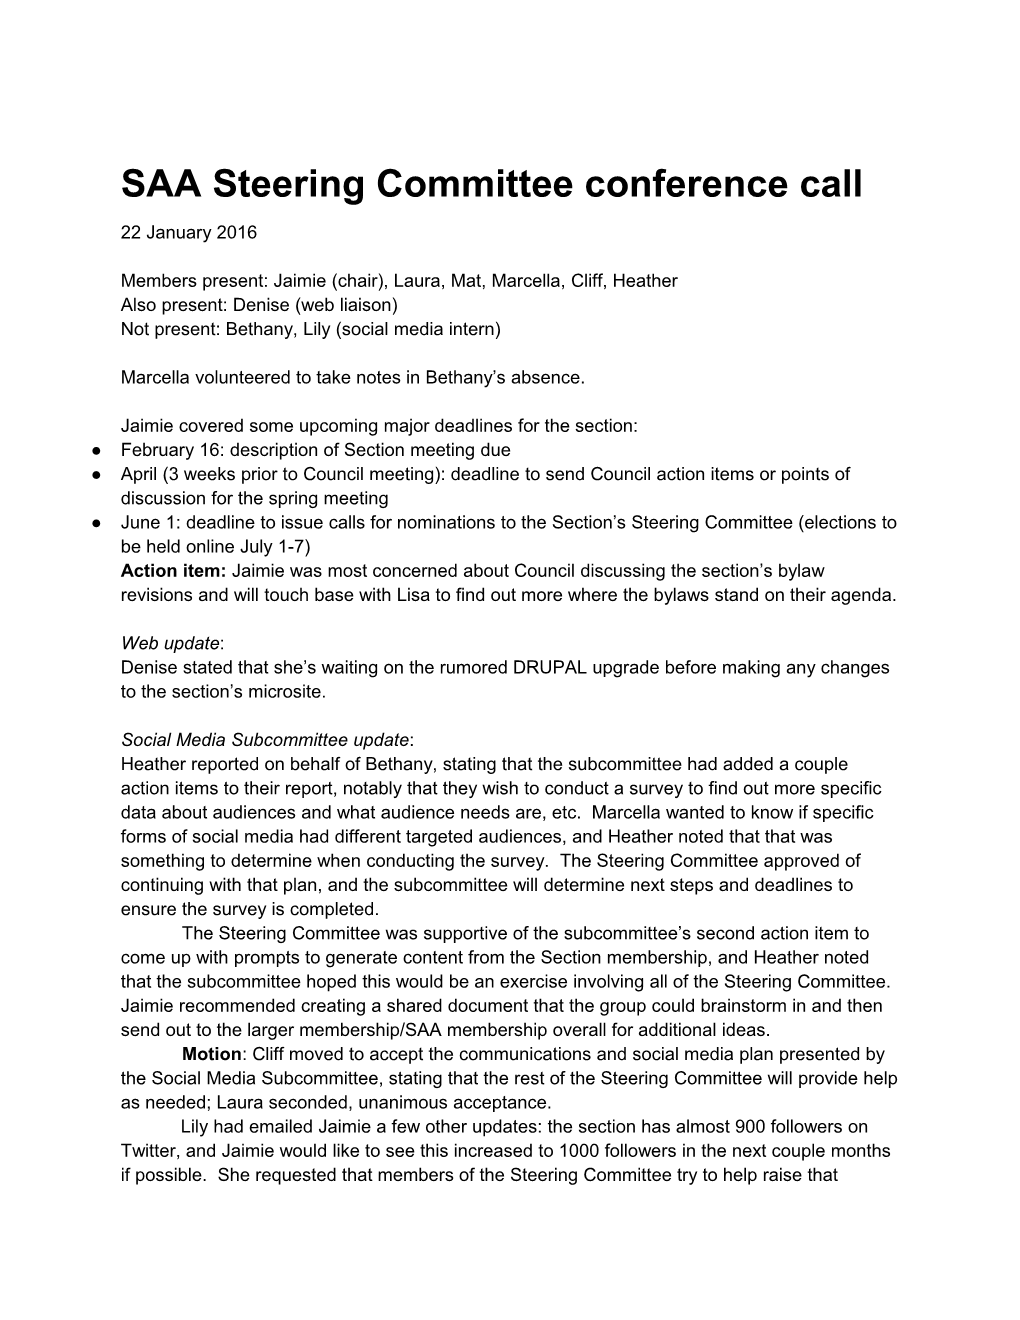 SAA Steering Committee Conference Call